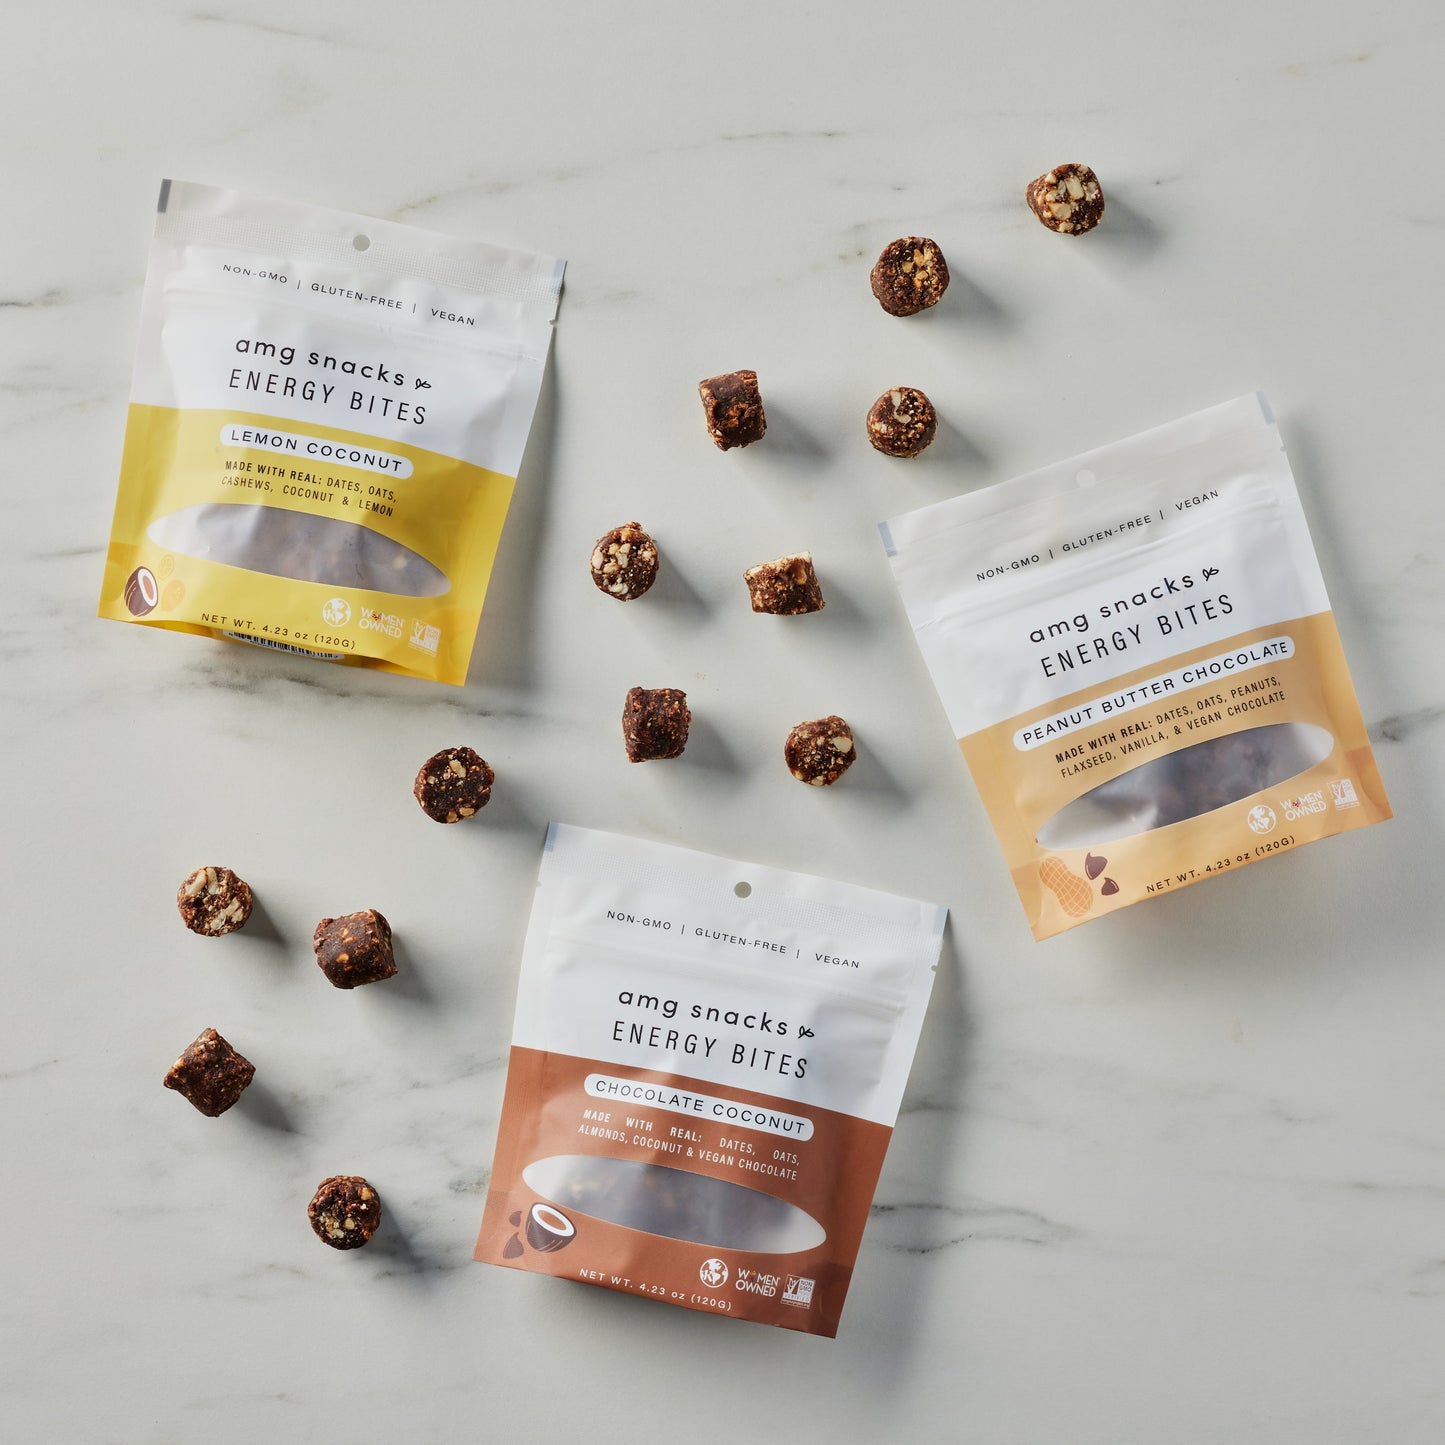 Chocolate Coconut, Peanut Butter Chocolate, and Chocolate Coconut Energy Bites on marble with energy bites scattered.